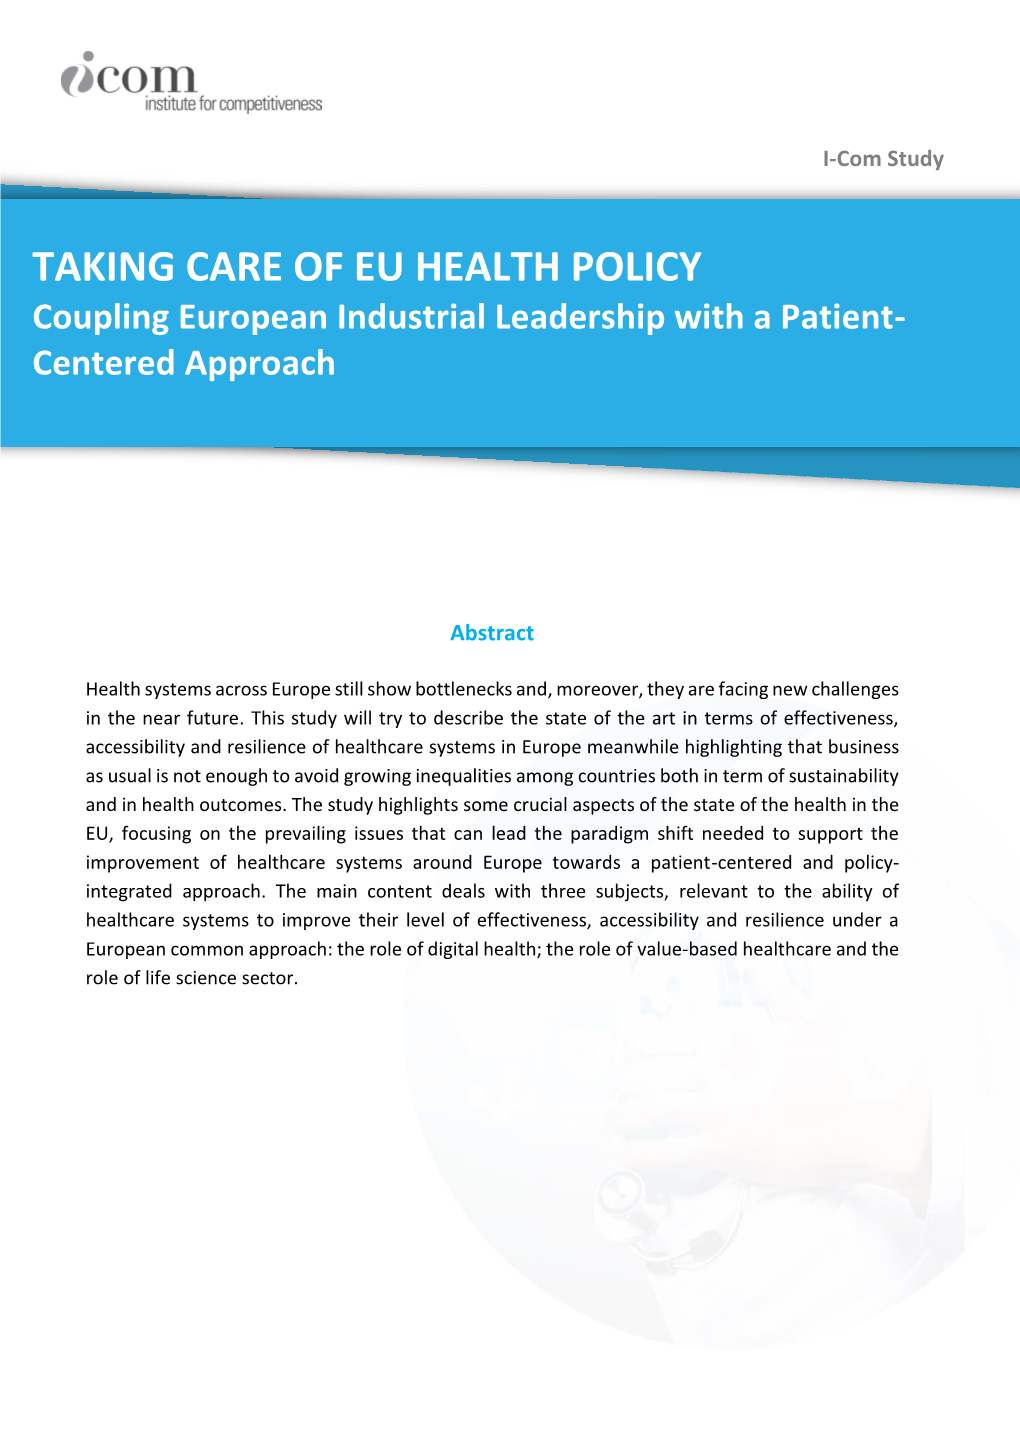 Taking Care of Eu Health Policy